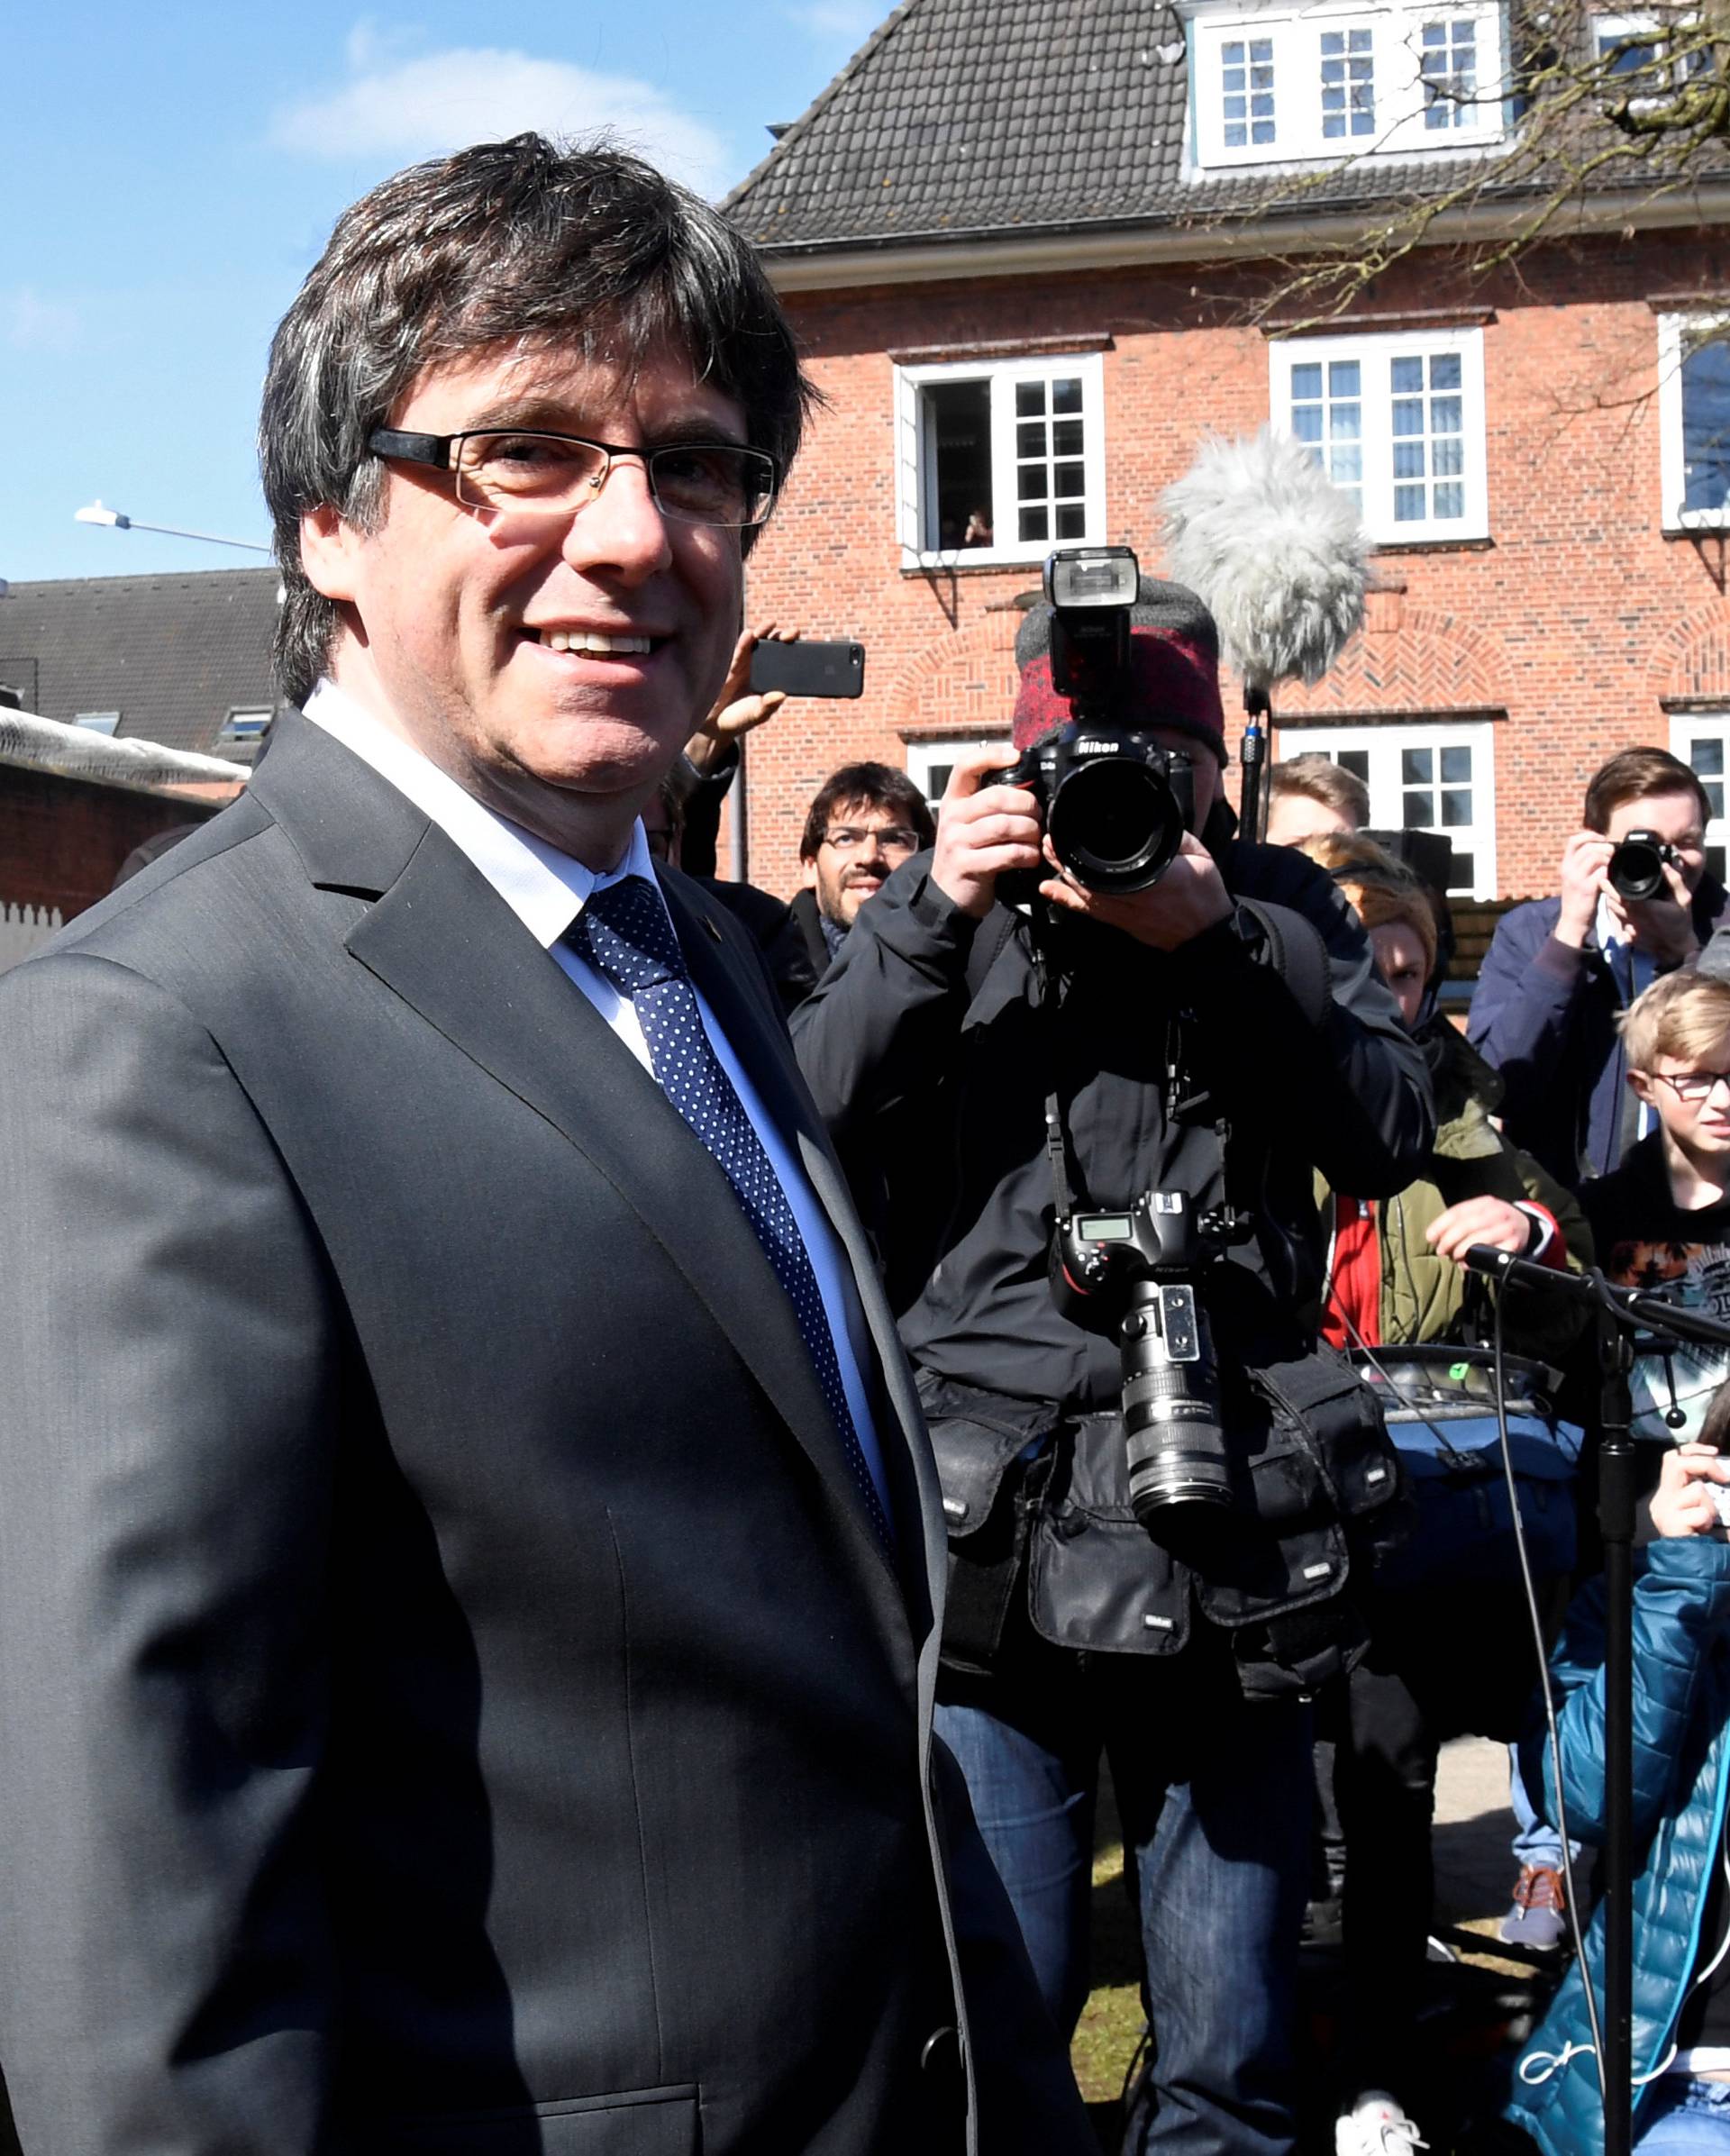 Catalonia's former leader Carles Puigdemont looks on as he leaves the prison in Neumuenster